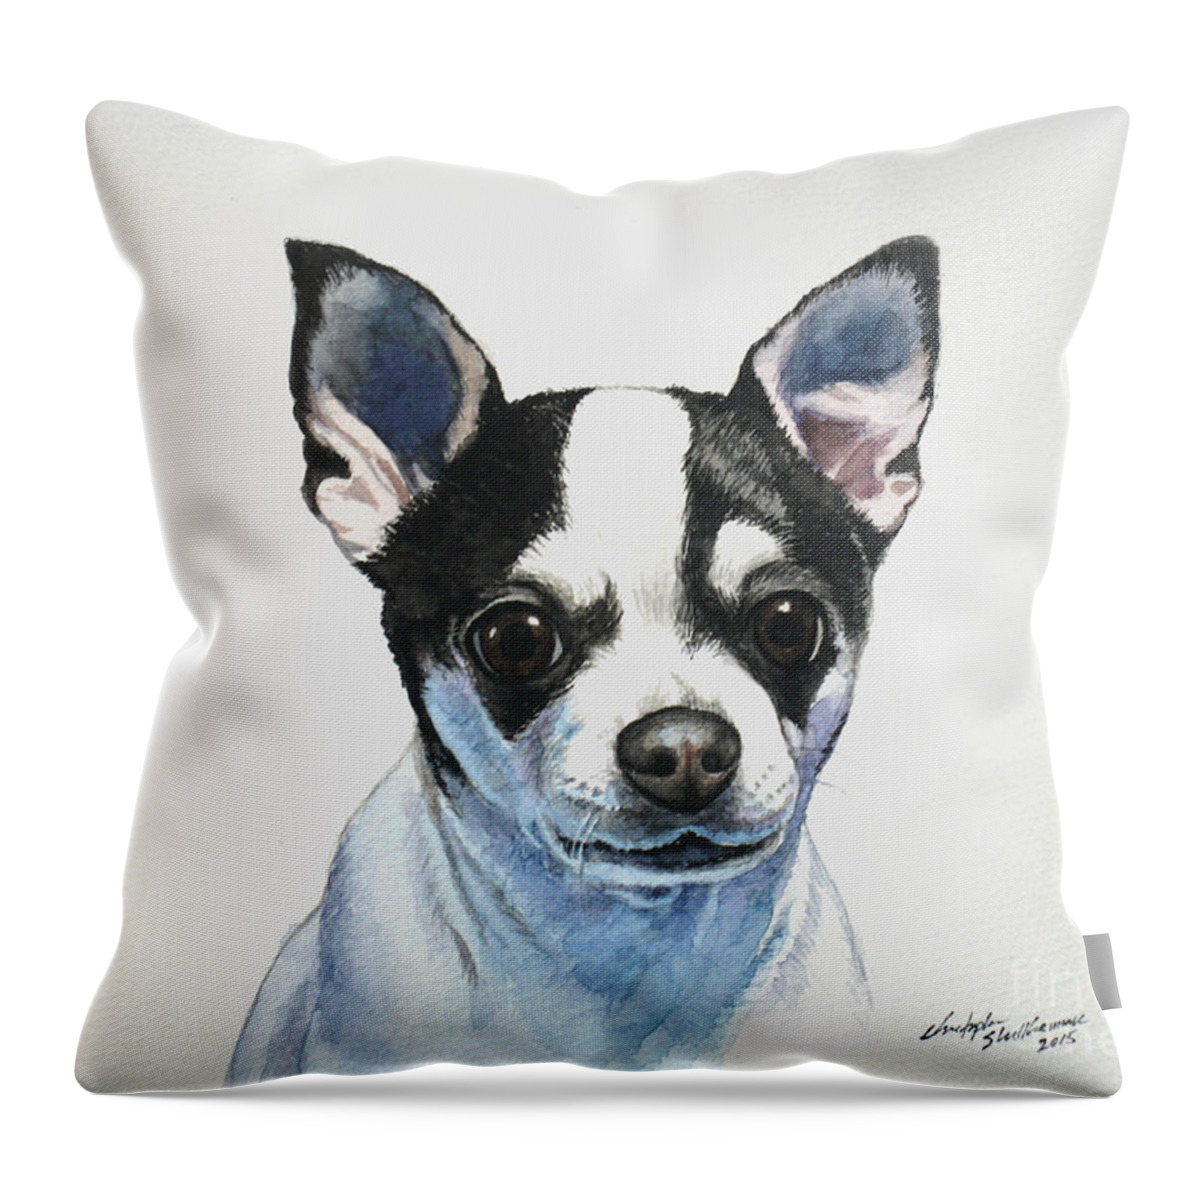 Chihuahua Throw Pillow featuring the painting Chihuahua Black Spots with White by Christopher Shellhammer